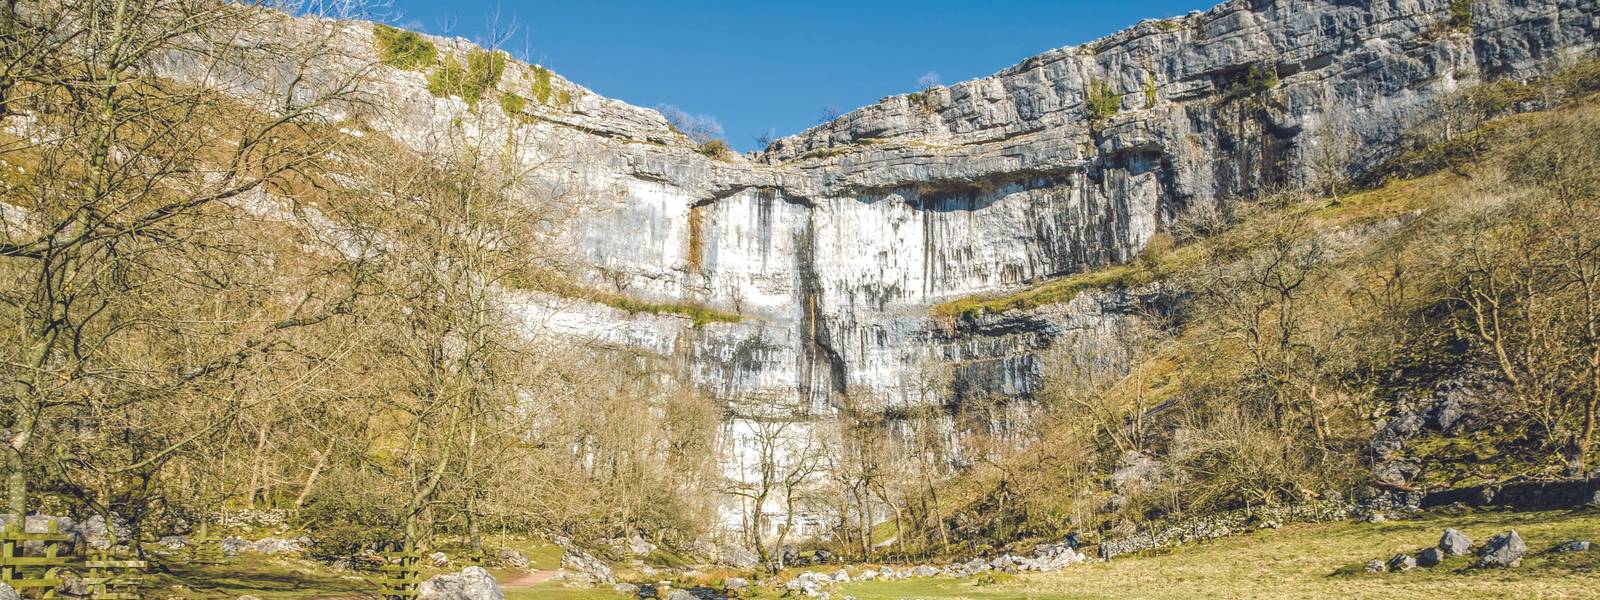 Limestone cliffs of Malham Cove in North Yorkshire, England on sunny day.